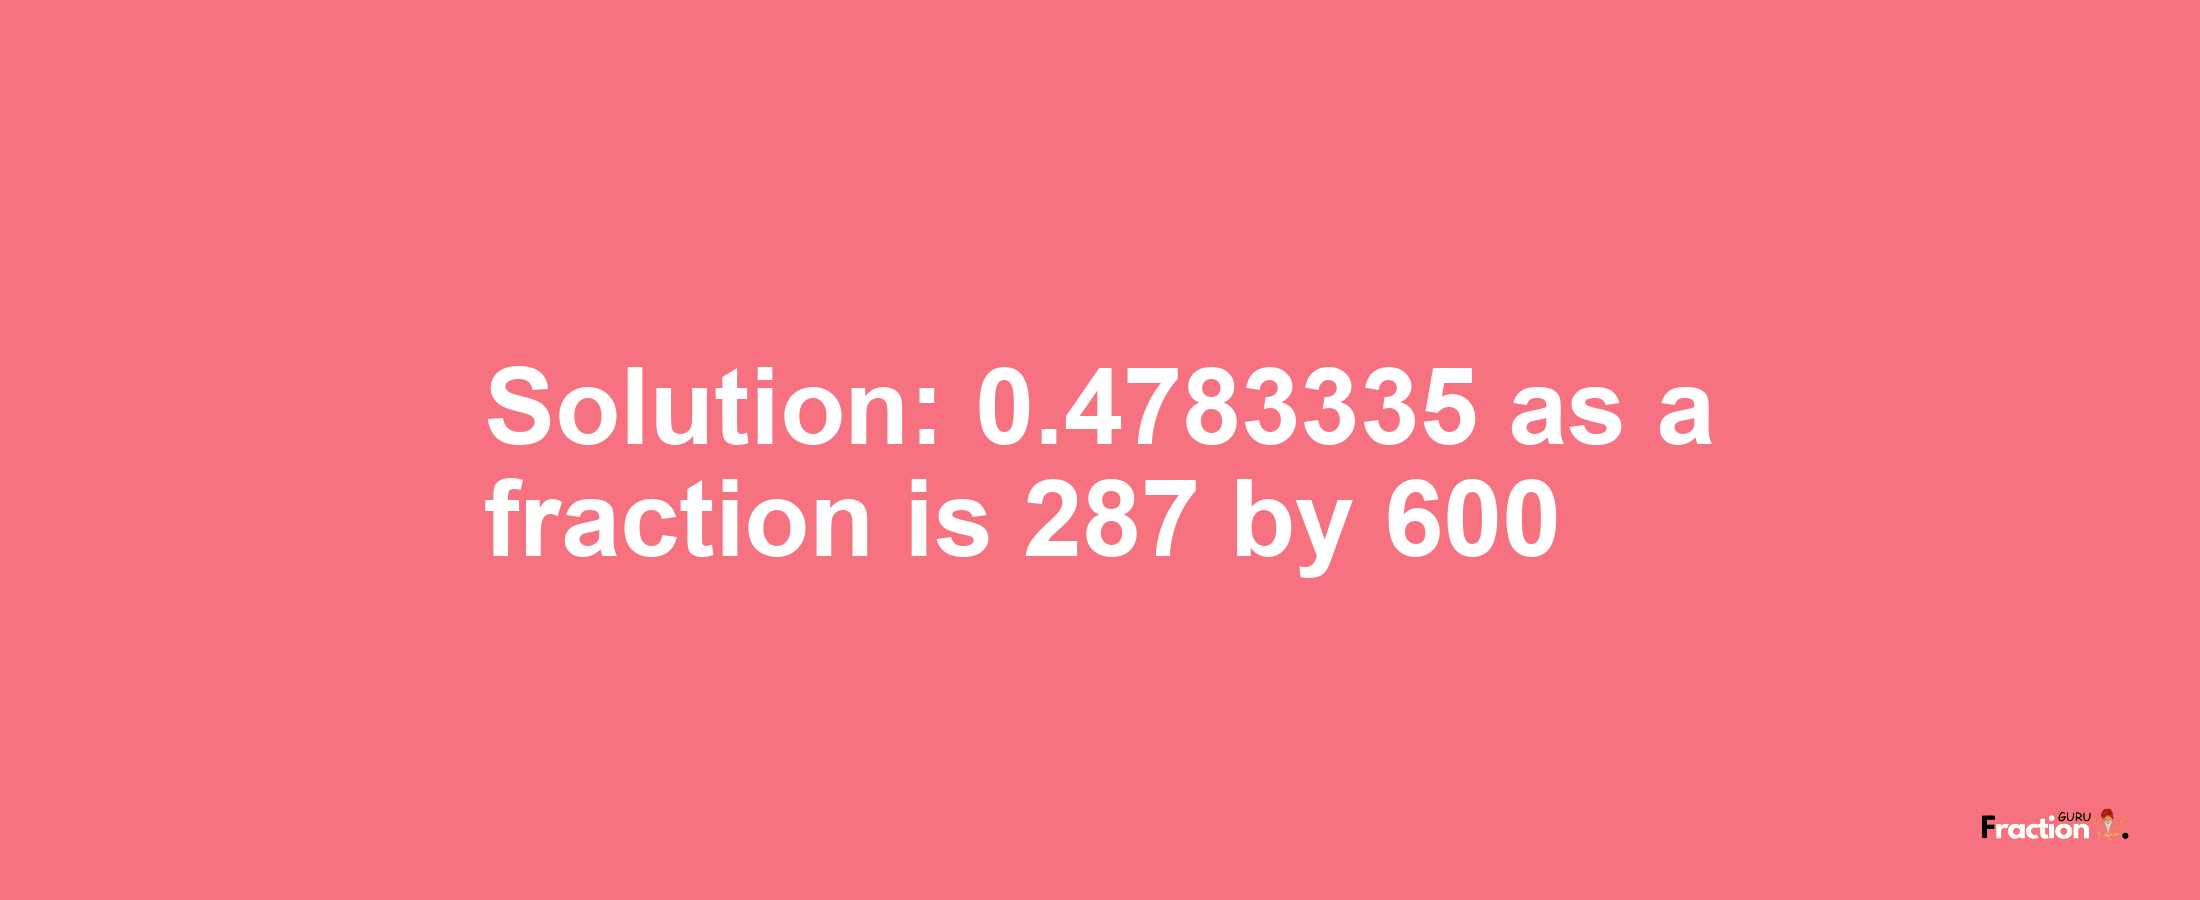 Solution:0.4783335 as a fraction is 287/600